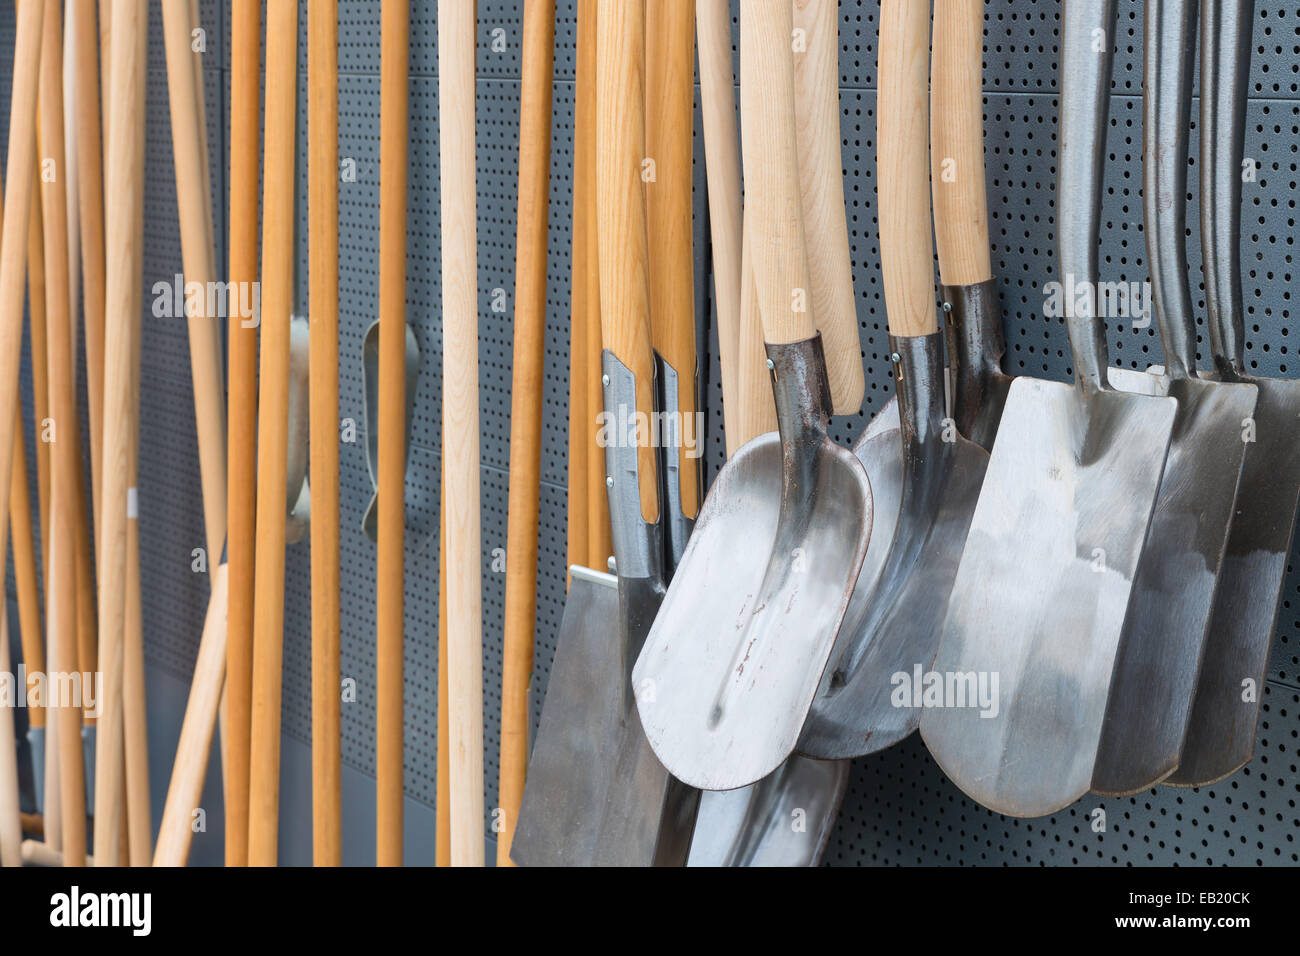 Garden shop with wooden spades for sale Stock Photo